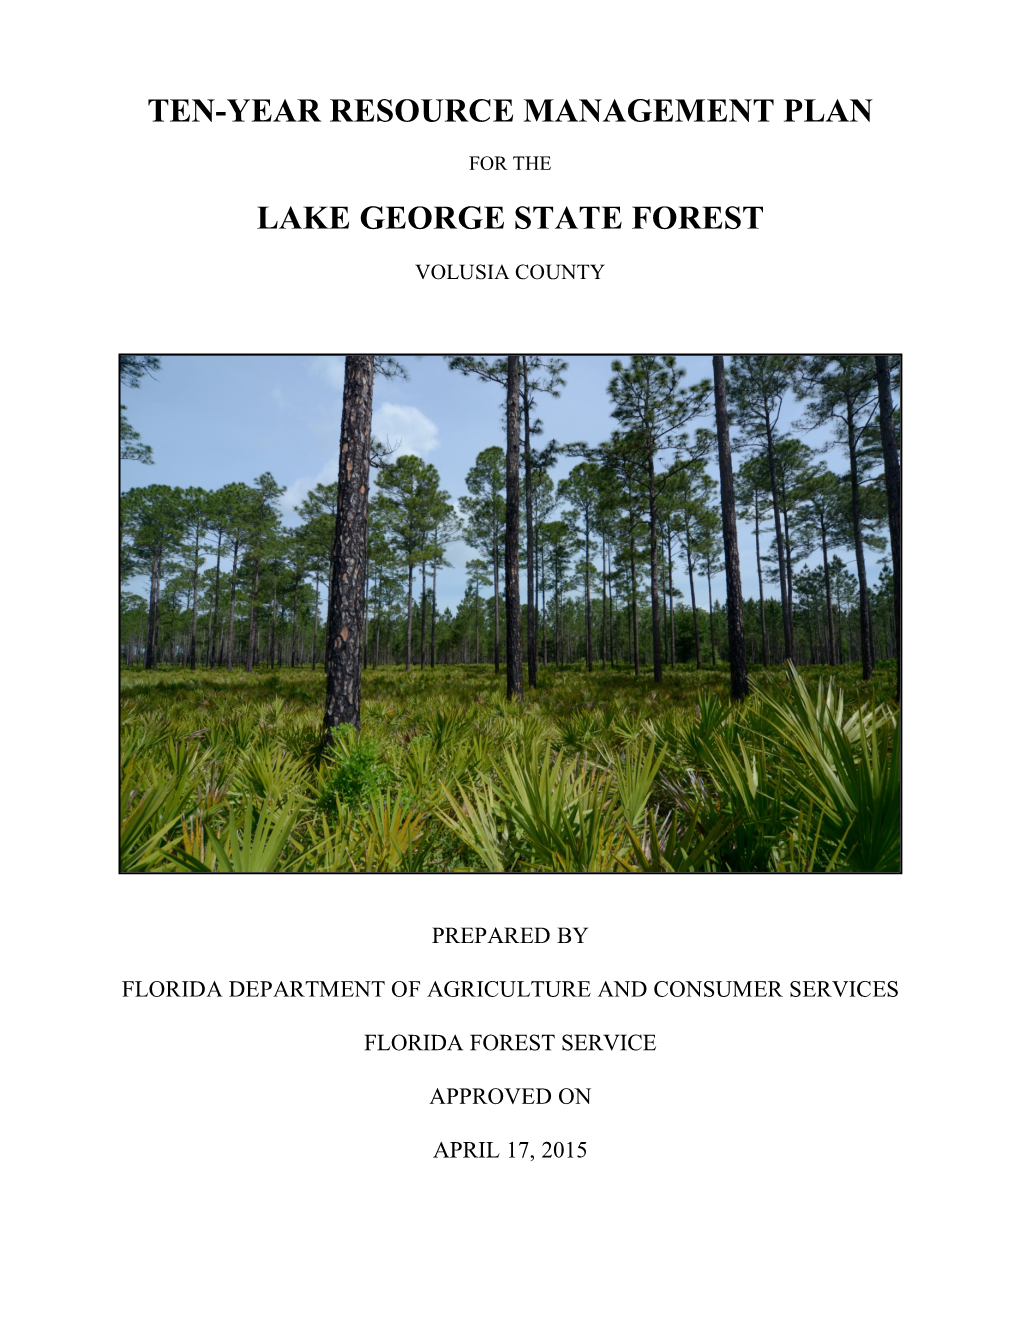 Lake George State Forest Management Plan